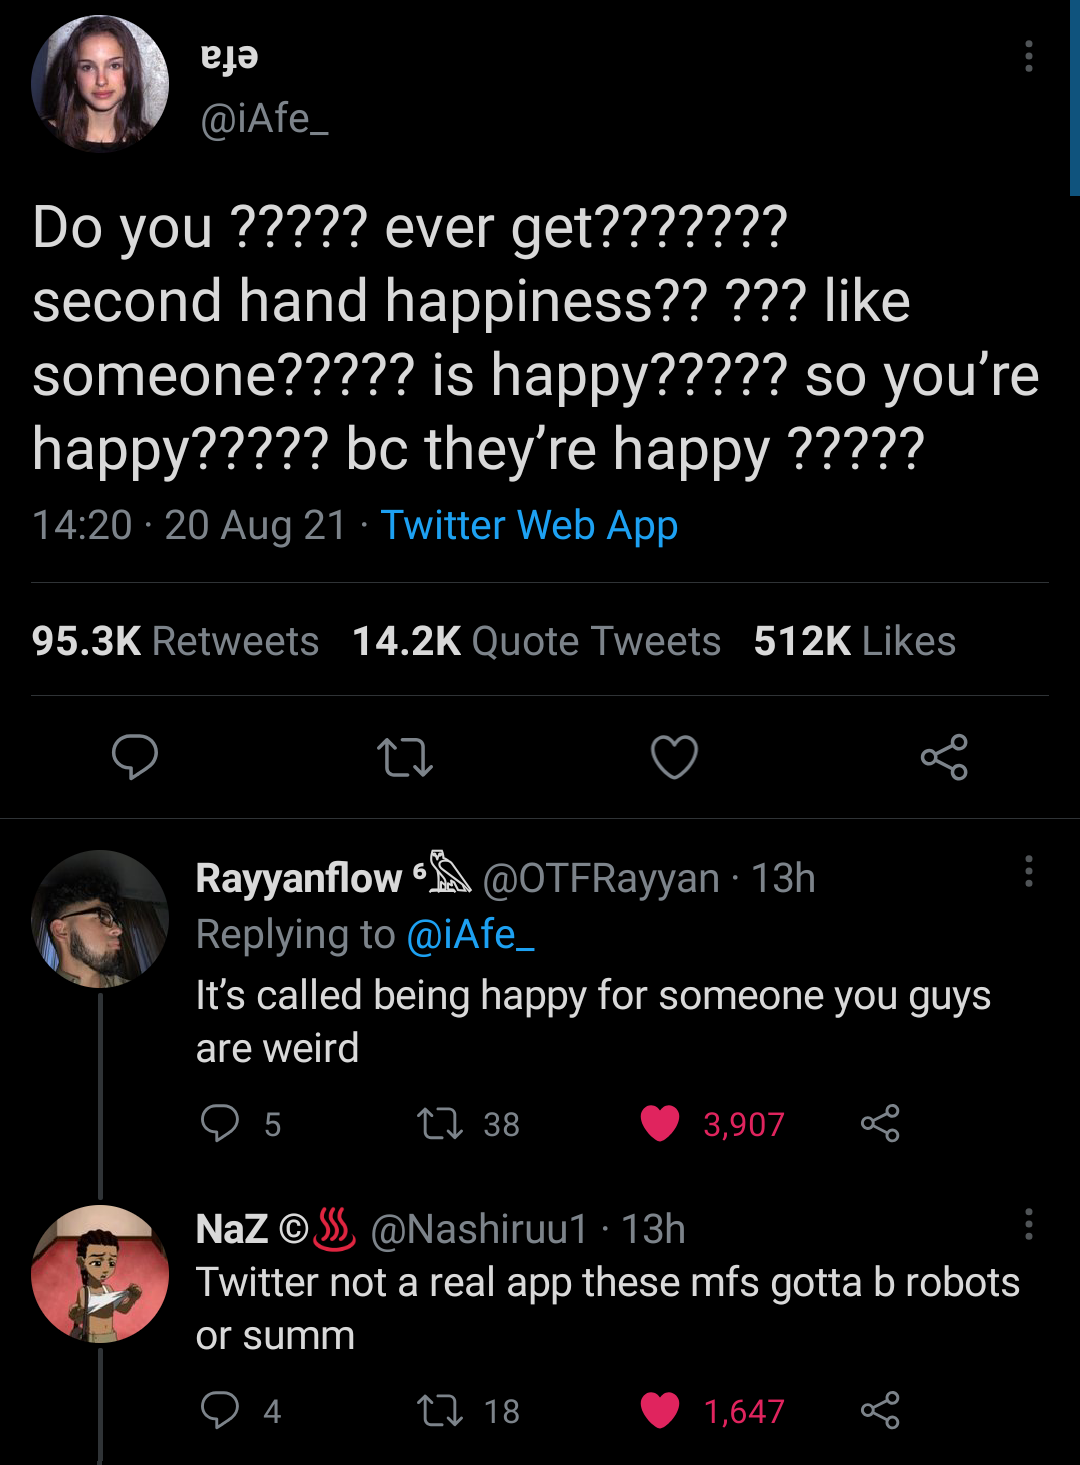 screenshot - ed Do you ????? ever get??????? second hand happiness?? ??? someone????? is happy????? so you're happy????? bc they're happy ????? 20 Aug 21 Twitter Web App Quote Tweets 22 Rayyanflow 13h It's called being happy for someone you guys are weird